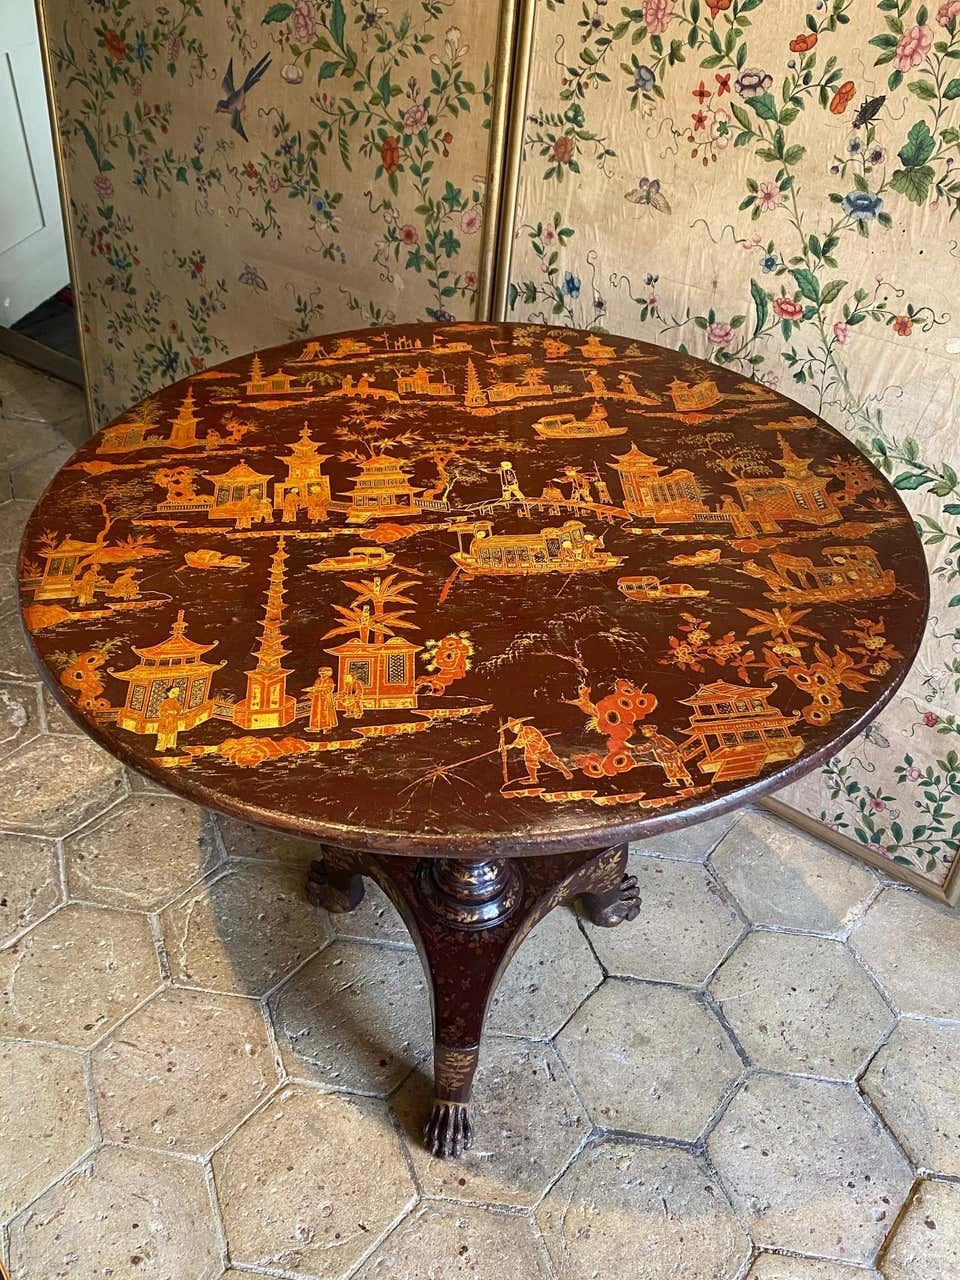 A fine quality Chinese export lacquer occasional table. 
Early 19th century, ca 1820.

The tilt top with typical exotic scenes of people, pagodas, lakes, foliage, bridges, fishermen and boats, all set with interconnecting islands. 
On a deep, rich,